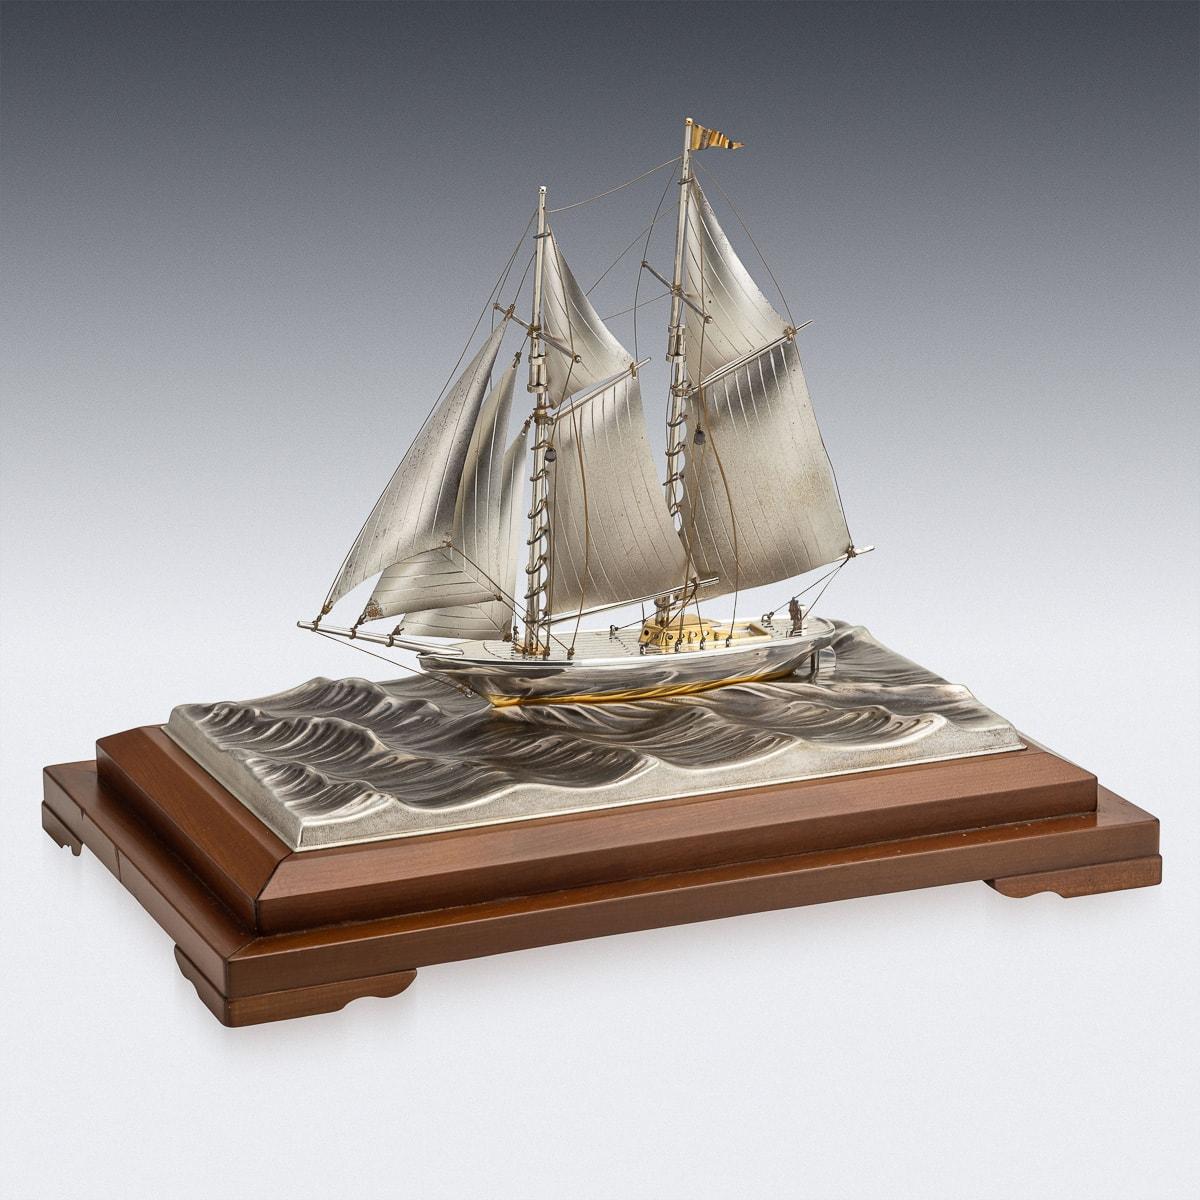 Mid 20th Century Japanese hand crafted silver yacht, presented in its original glass case and wooden plinth.

CONDITION
In Great Condition - No Damage.

SIZE
Height: 32cm
Width: 32cm
Depth: 20cm.